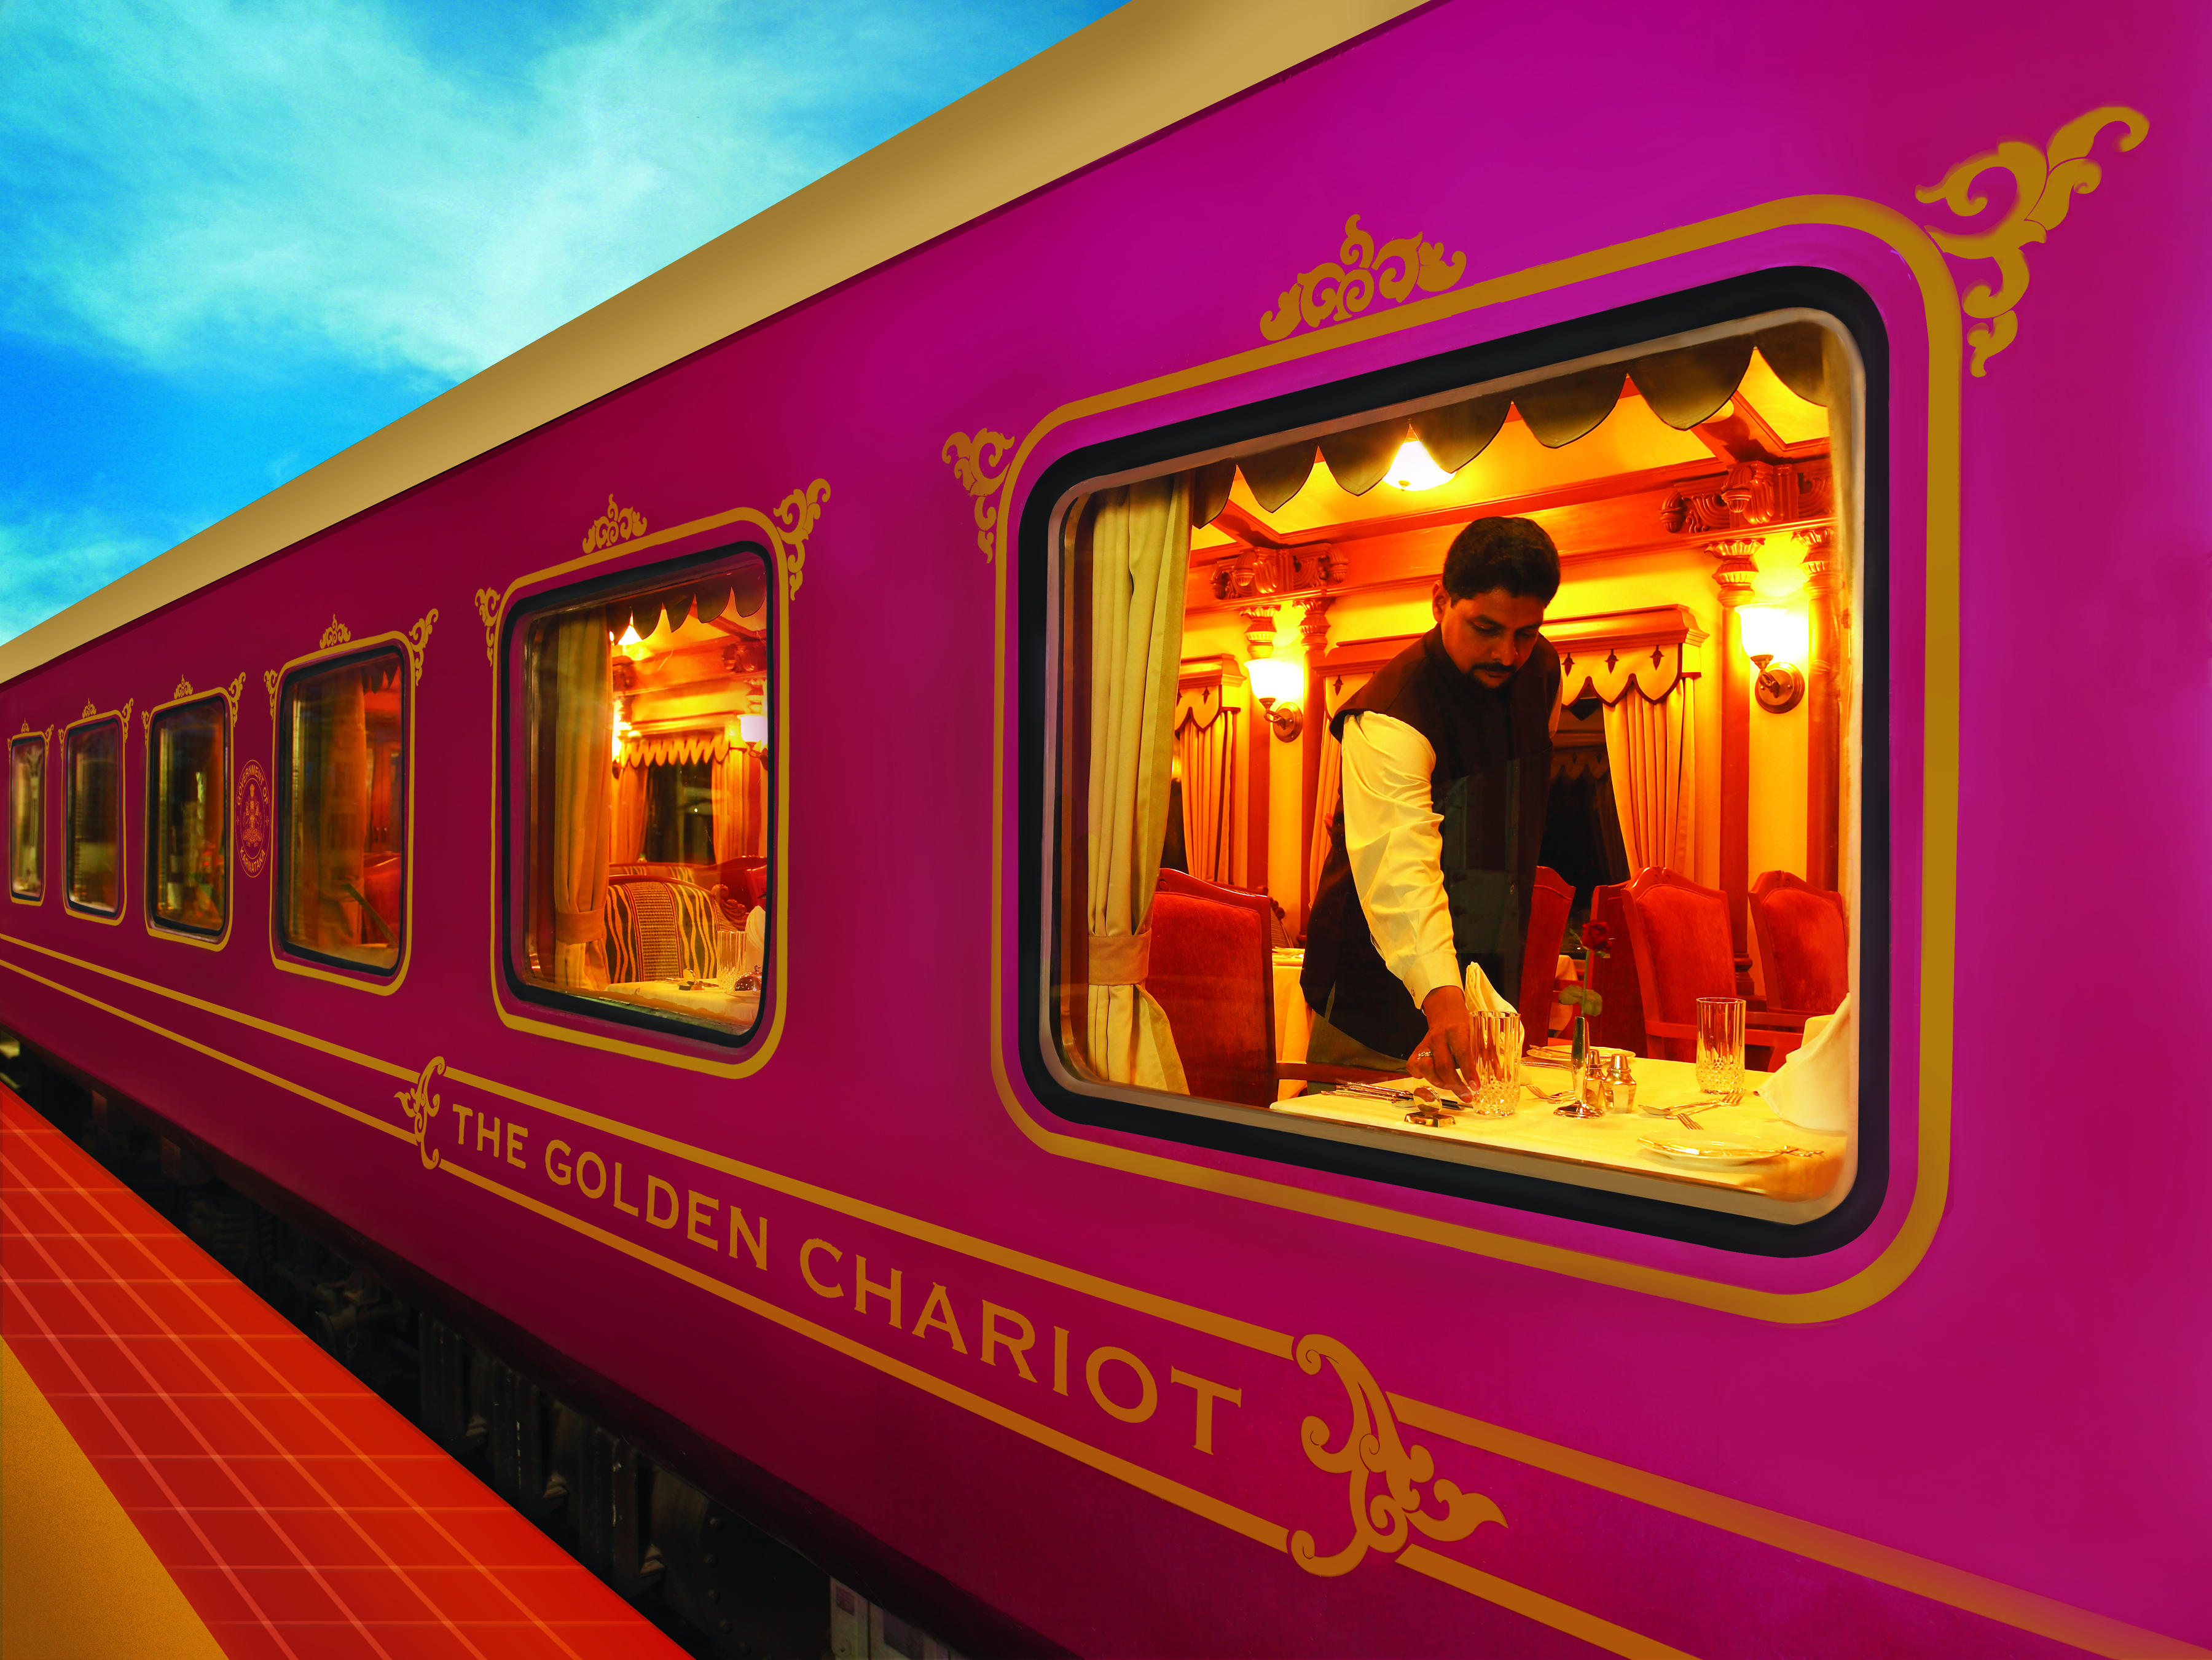 top 5 most luxurious trains in india, golden chariot train schedule , golden chariot train price for indian , the golden chariot train route and fare , golden chariot train inside , golden chariot train ticket price in indian rupees , golden chariot offers , golden chariot facilities , golden chariot train photos